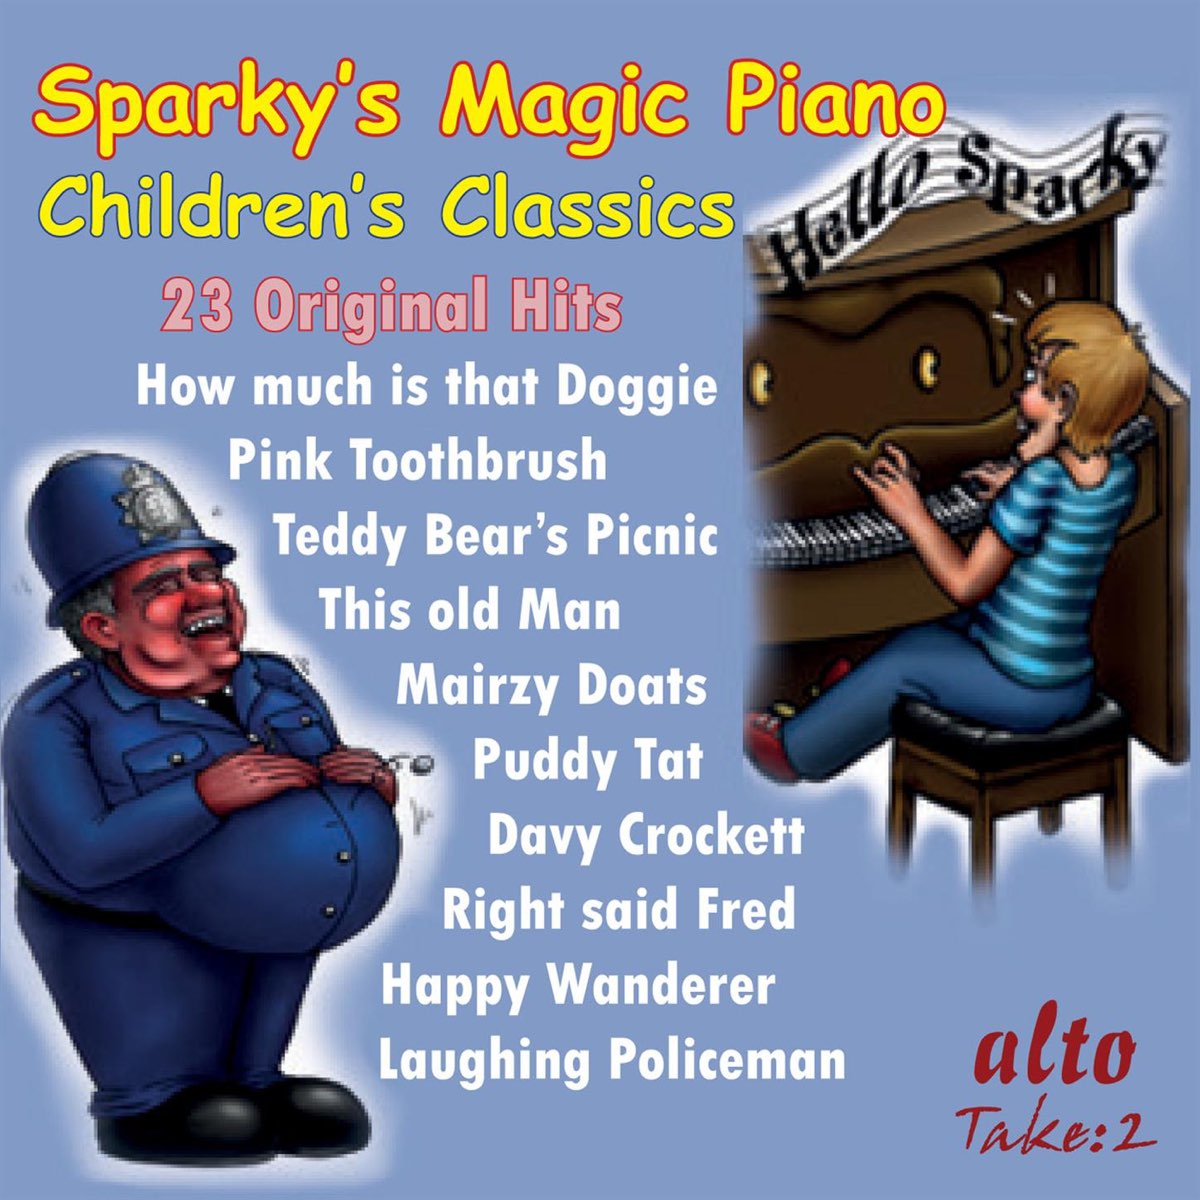 Sparky's Magic Piano - Children's Classics by Various Artists on Apple Music